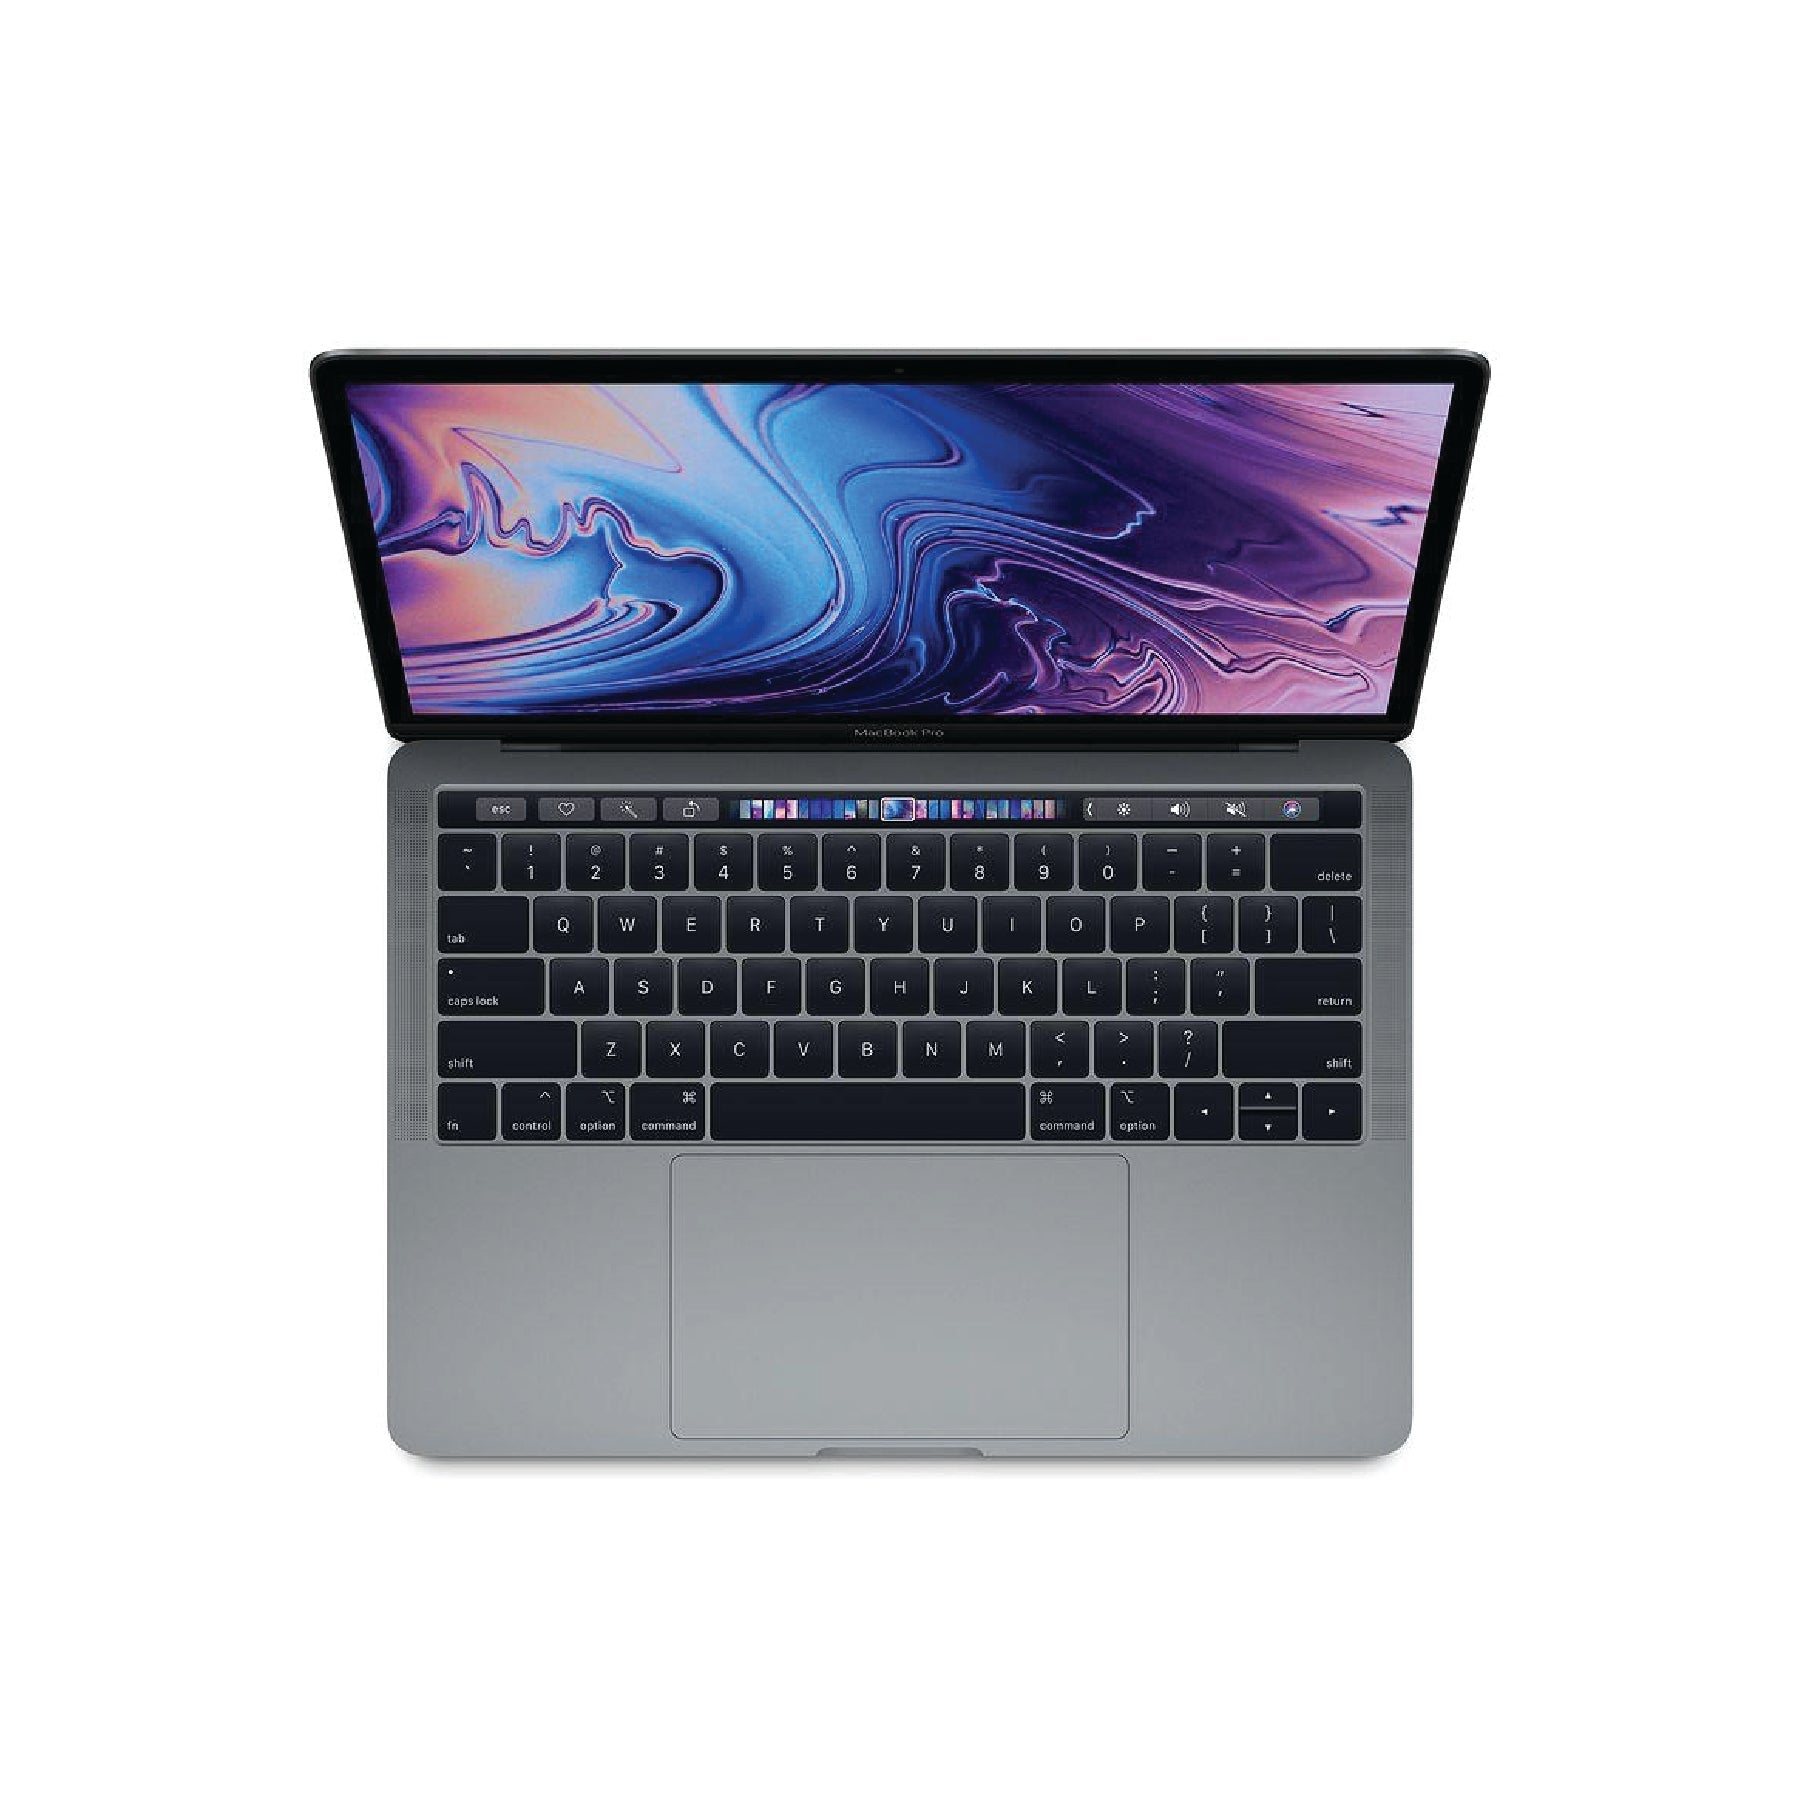 MacBook Pro (13-inch, 2017, Four Thunderbolt 3 ports) 3.1GHz, Intel Core i5 256GB - Space Grey (Good) - iStore Pre-owned